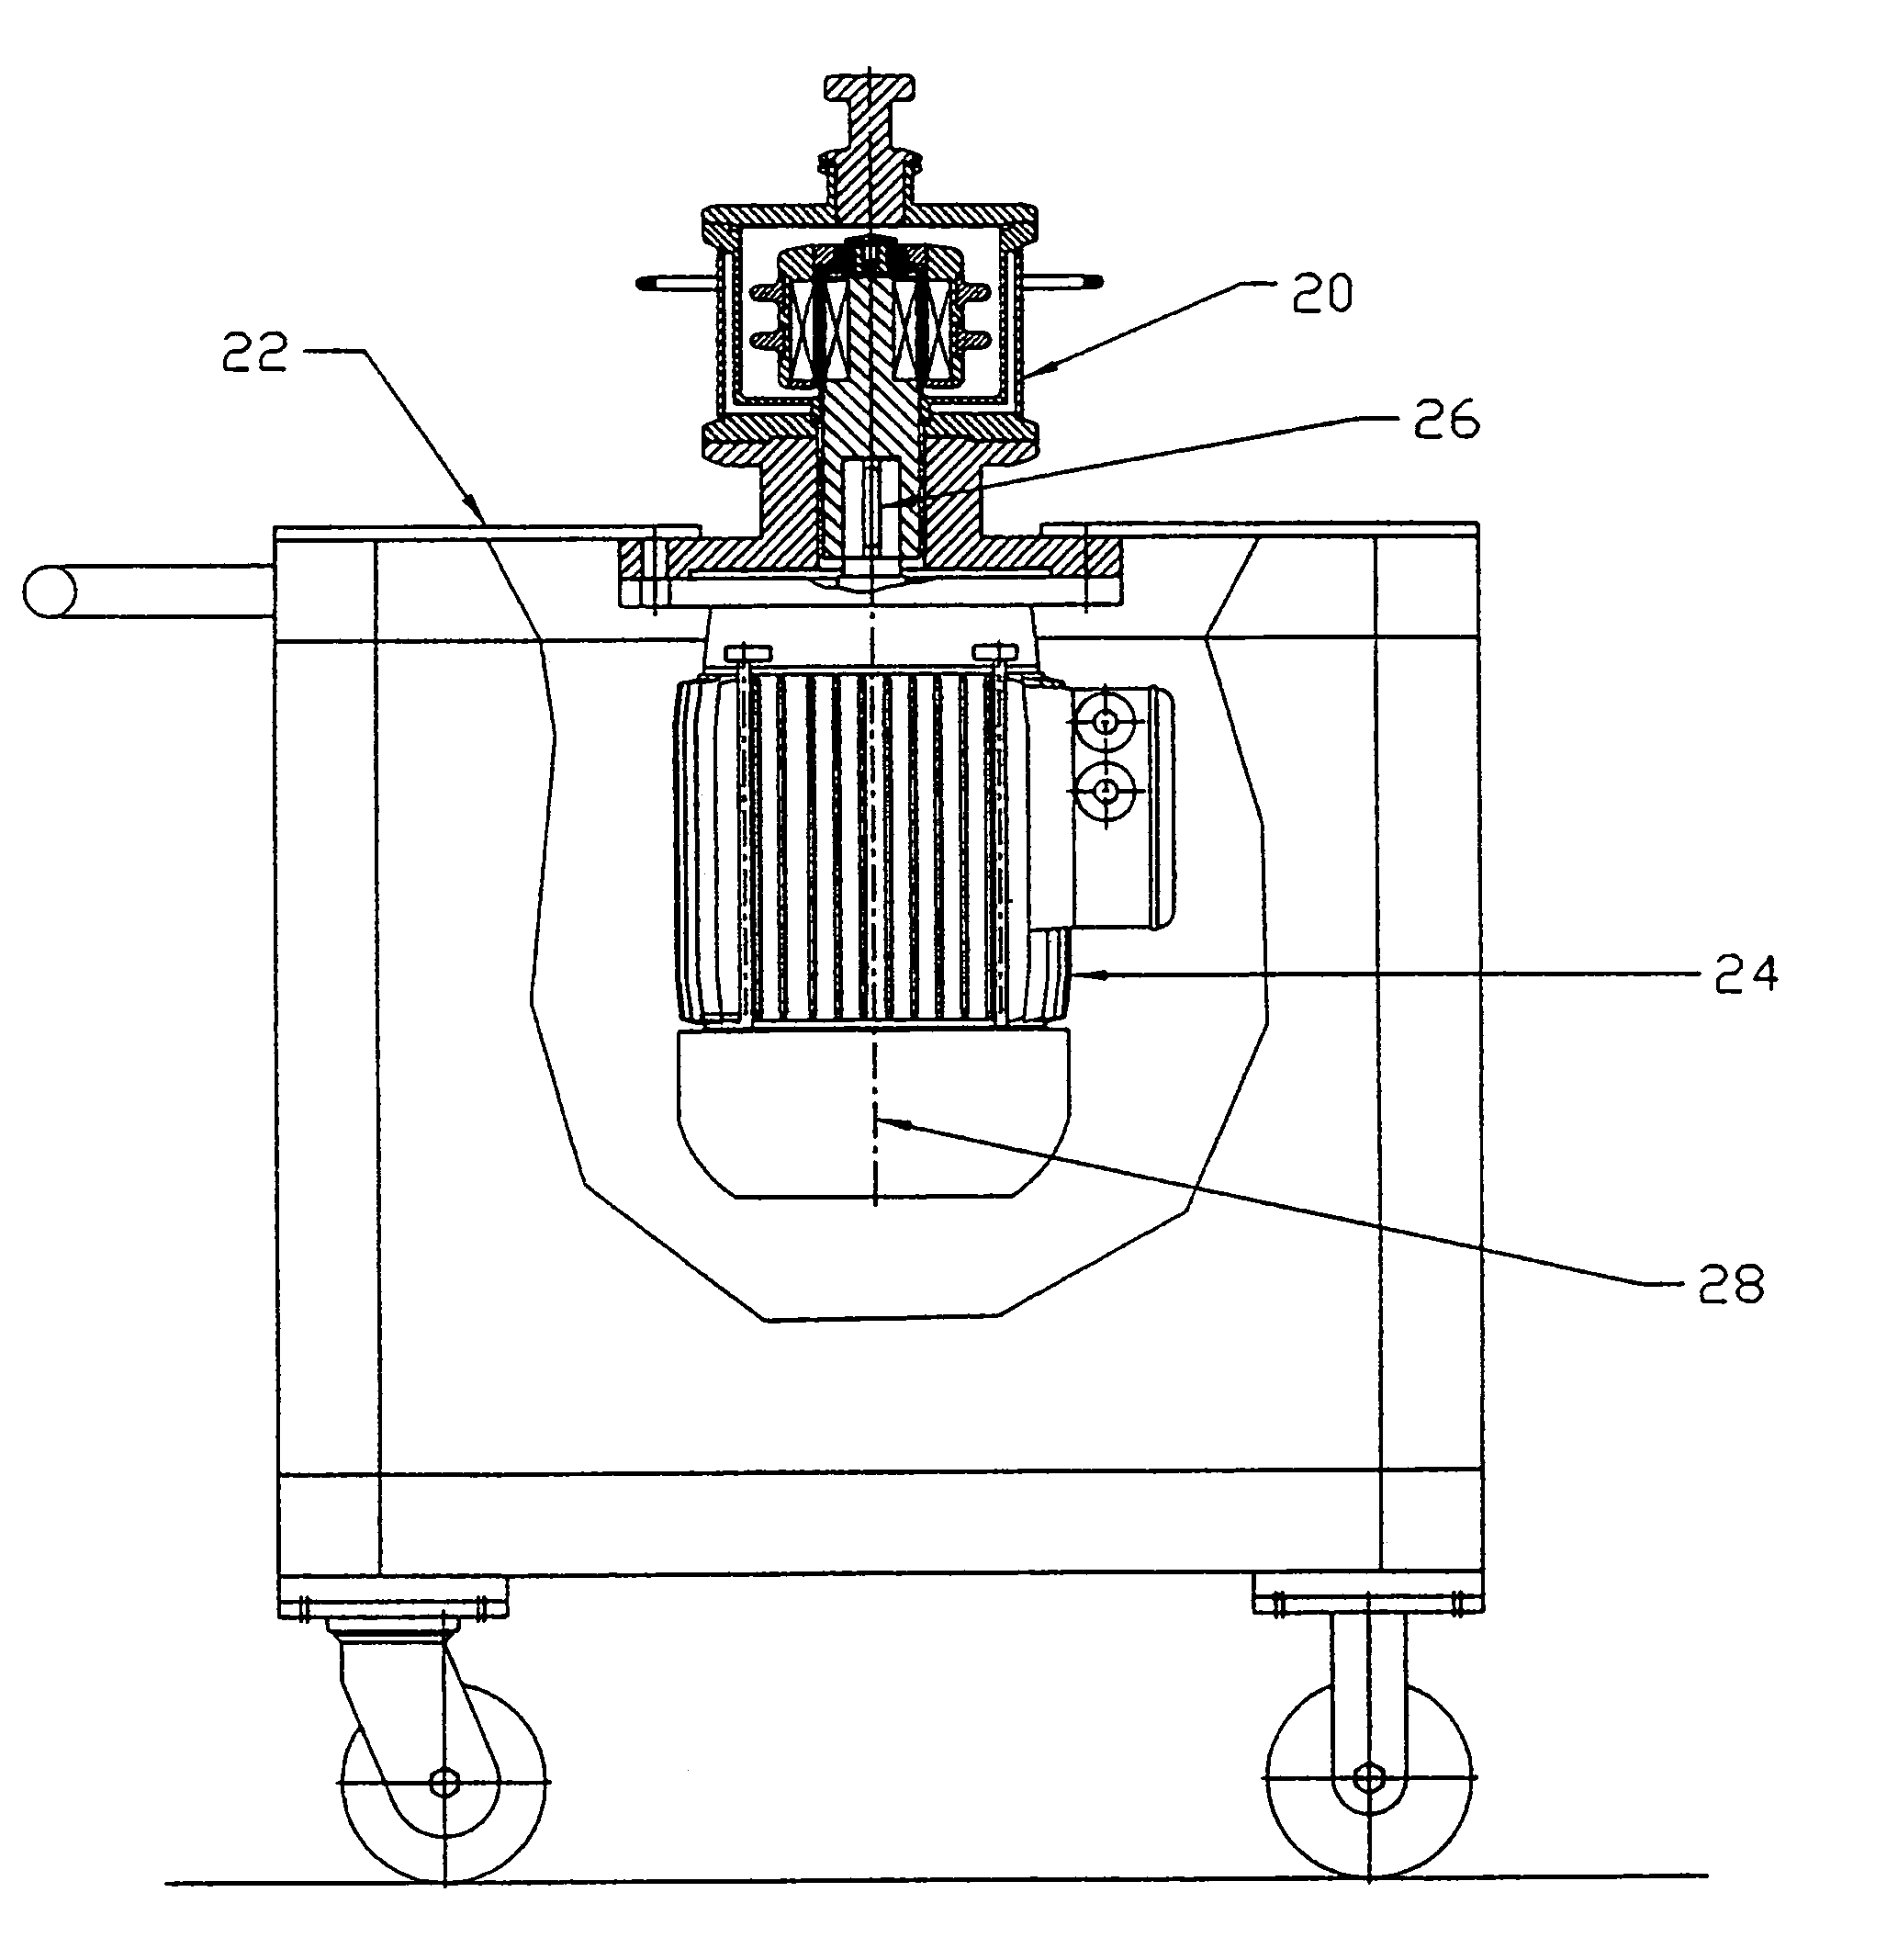 System and method for milling materials